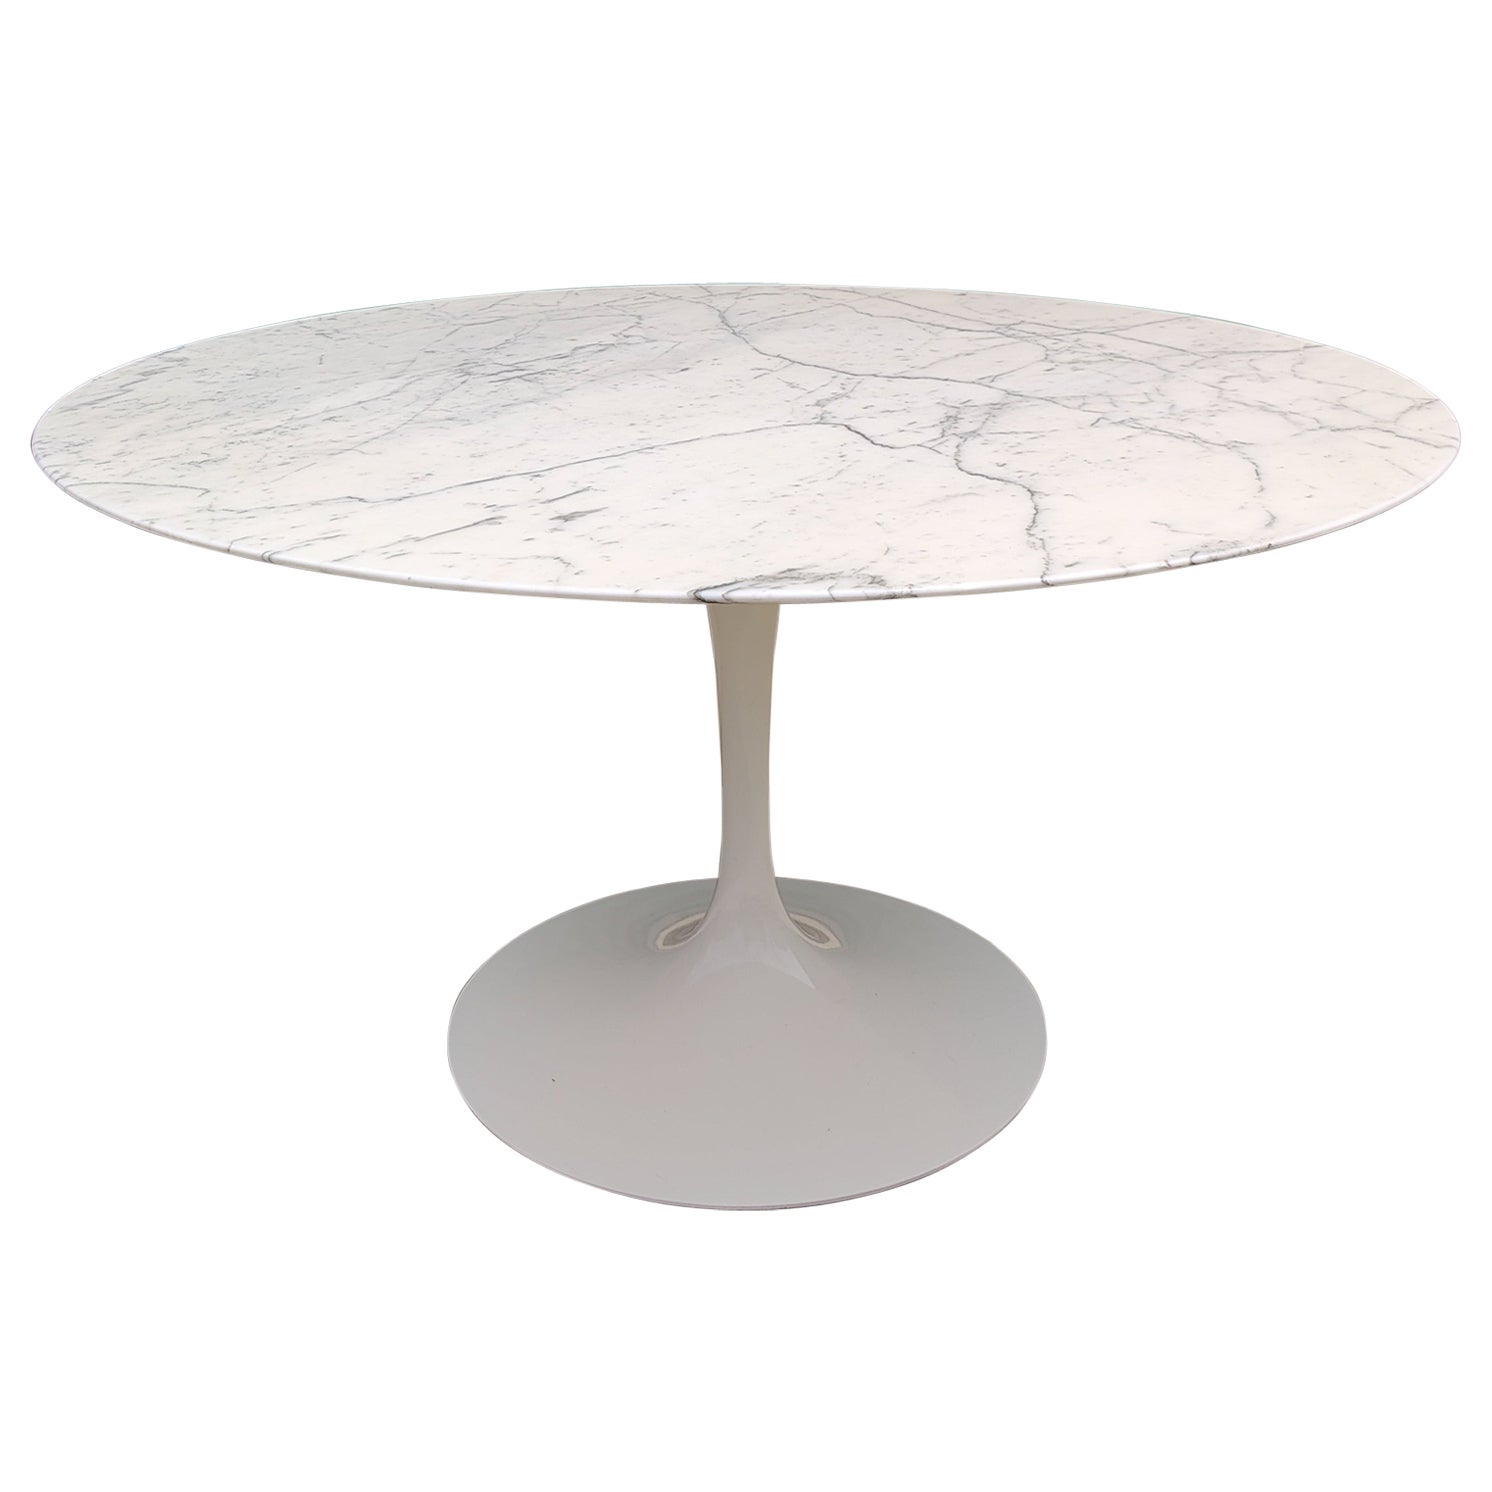 Marble Tulip Table by Eero Saarinen for Knoll, 50th Anniversary Edition